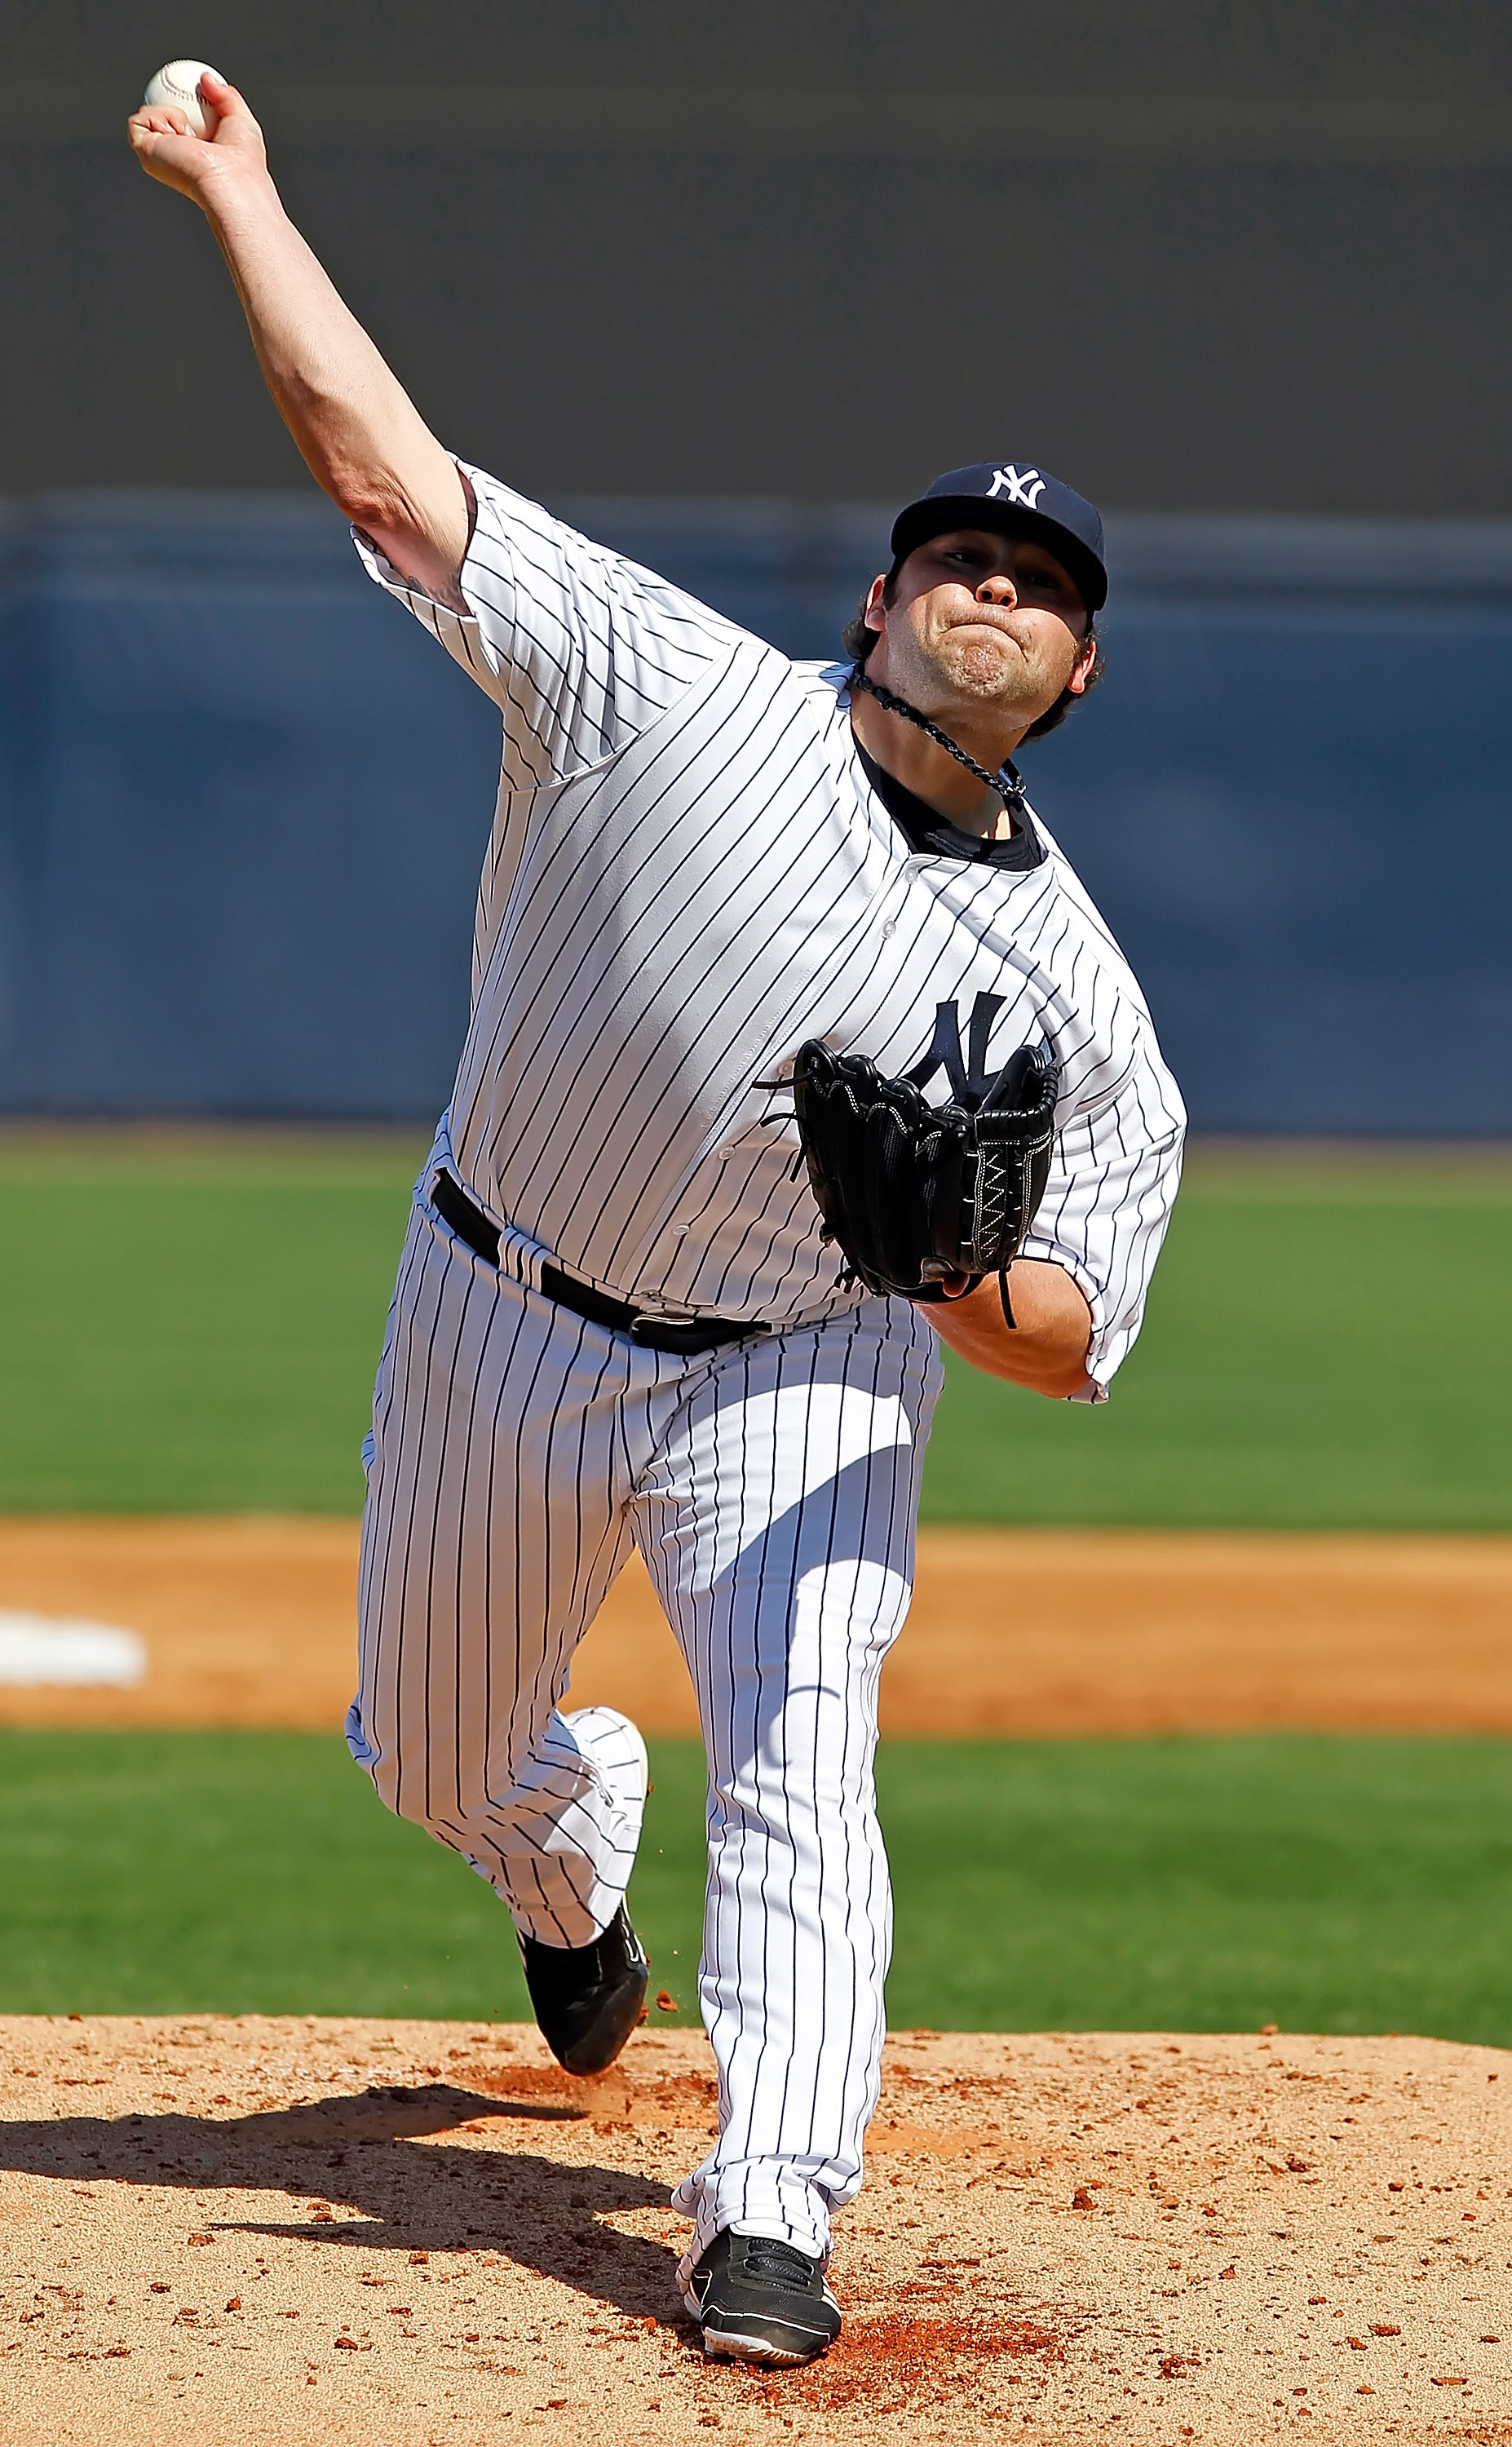 TAMPA, FL - FEBRUARY 26:  Pitcher Joba Chamberlain #62 of the New York Yankees pitches against the Philadelphia Phillies during a Grapefruit League Spring Training Game at George M. Steinbrenner Field on February 26, 2011 in Tampa, Florida.  (Photo by J.